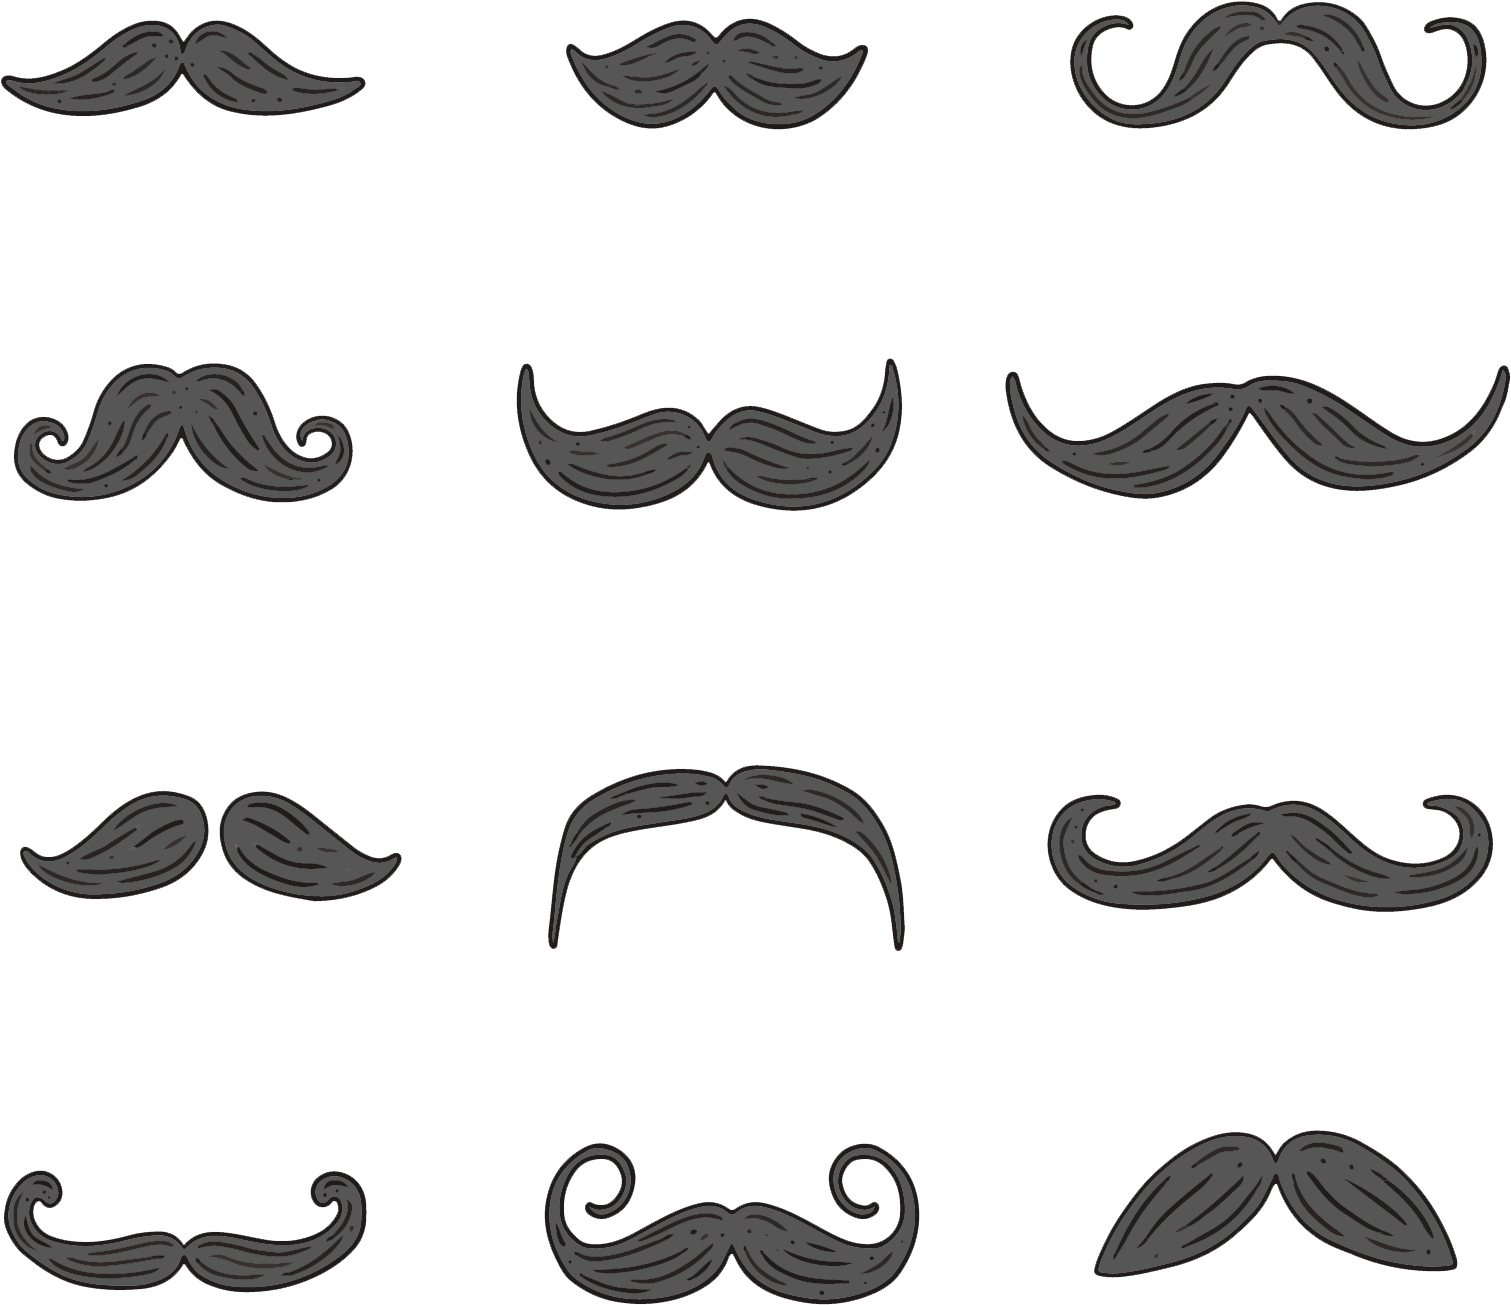 Varietyof Moustache Styles Illustration PNG